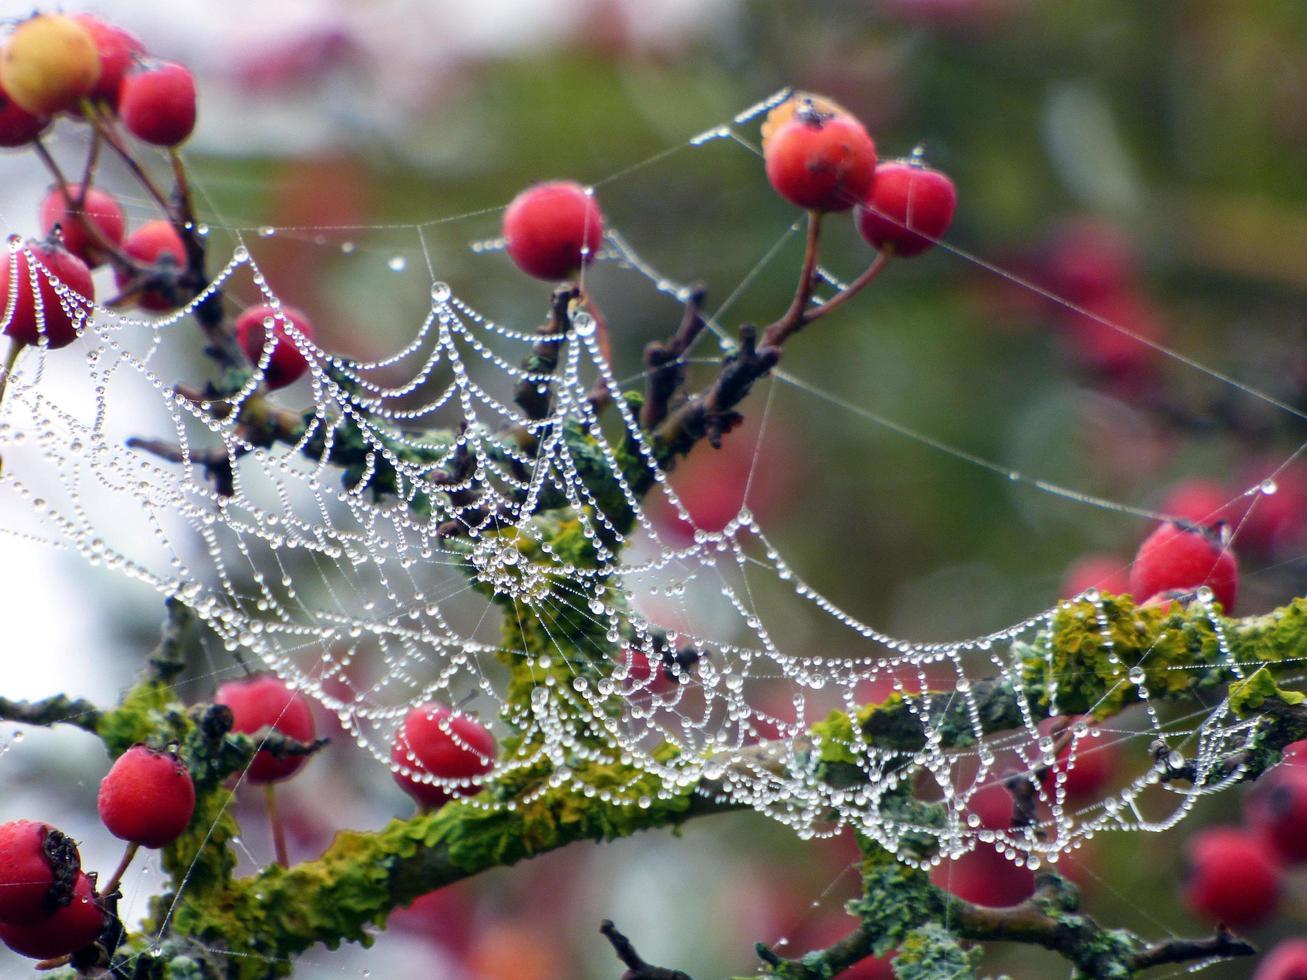 Spider web and red berries photo